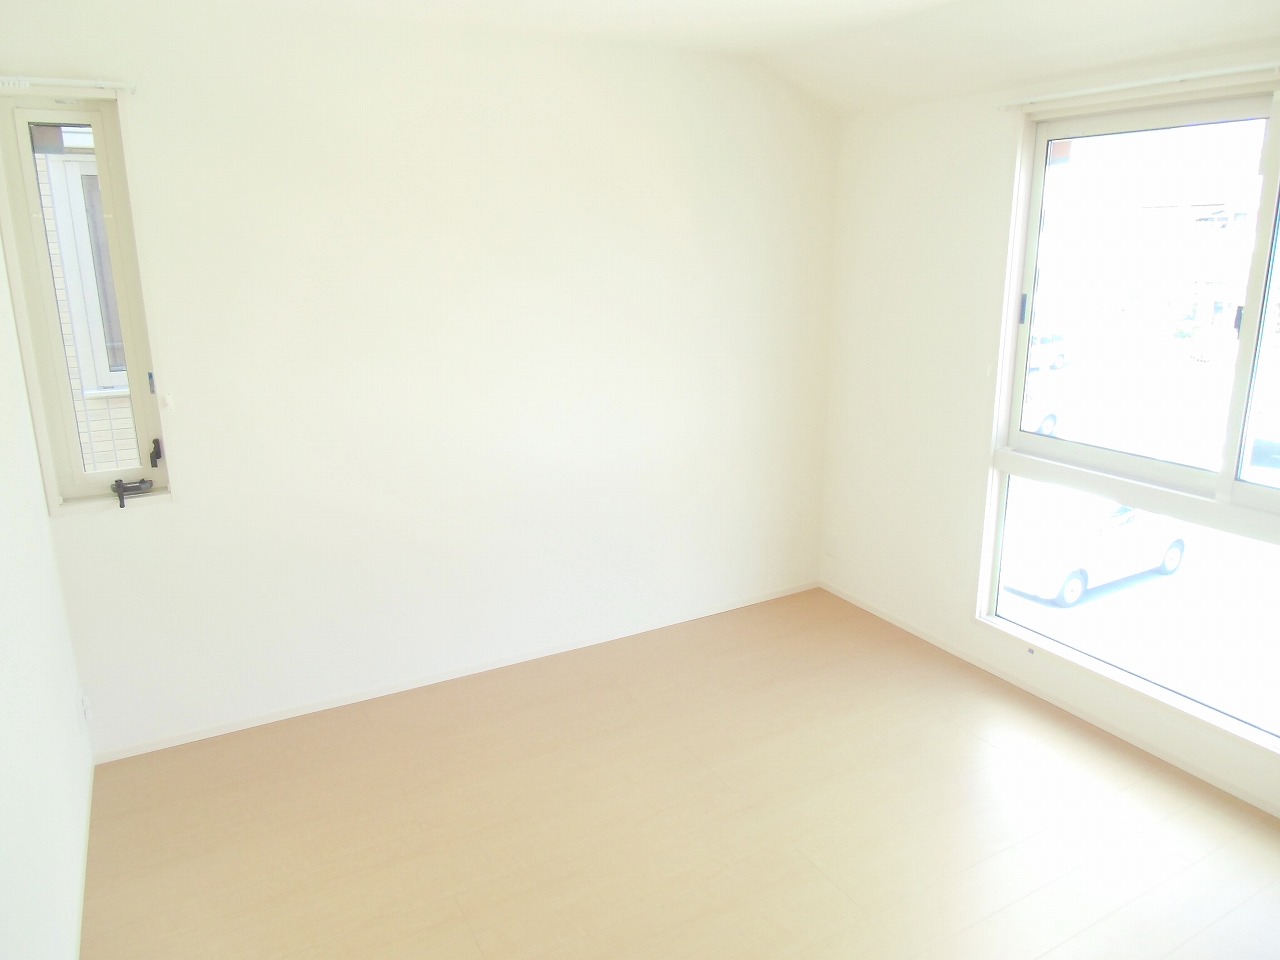 Other room space. It is similar to Listing